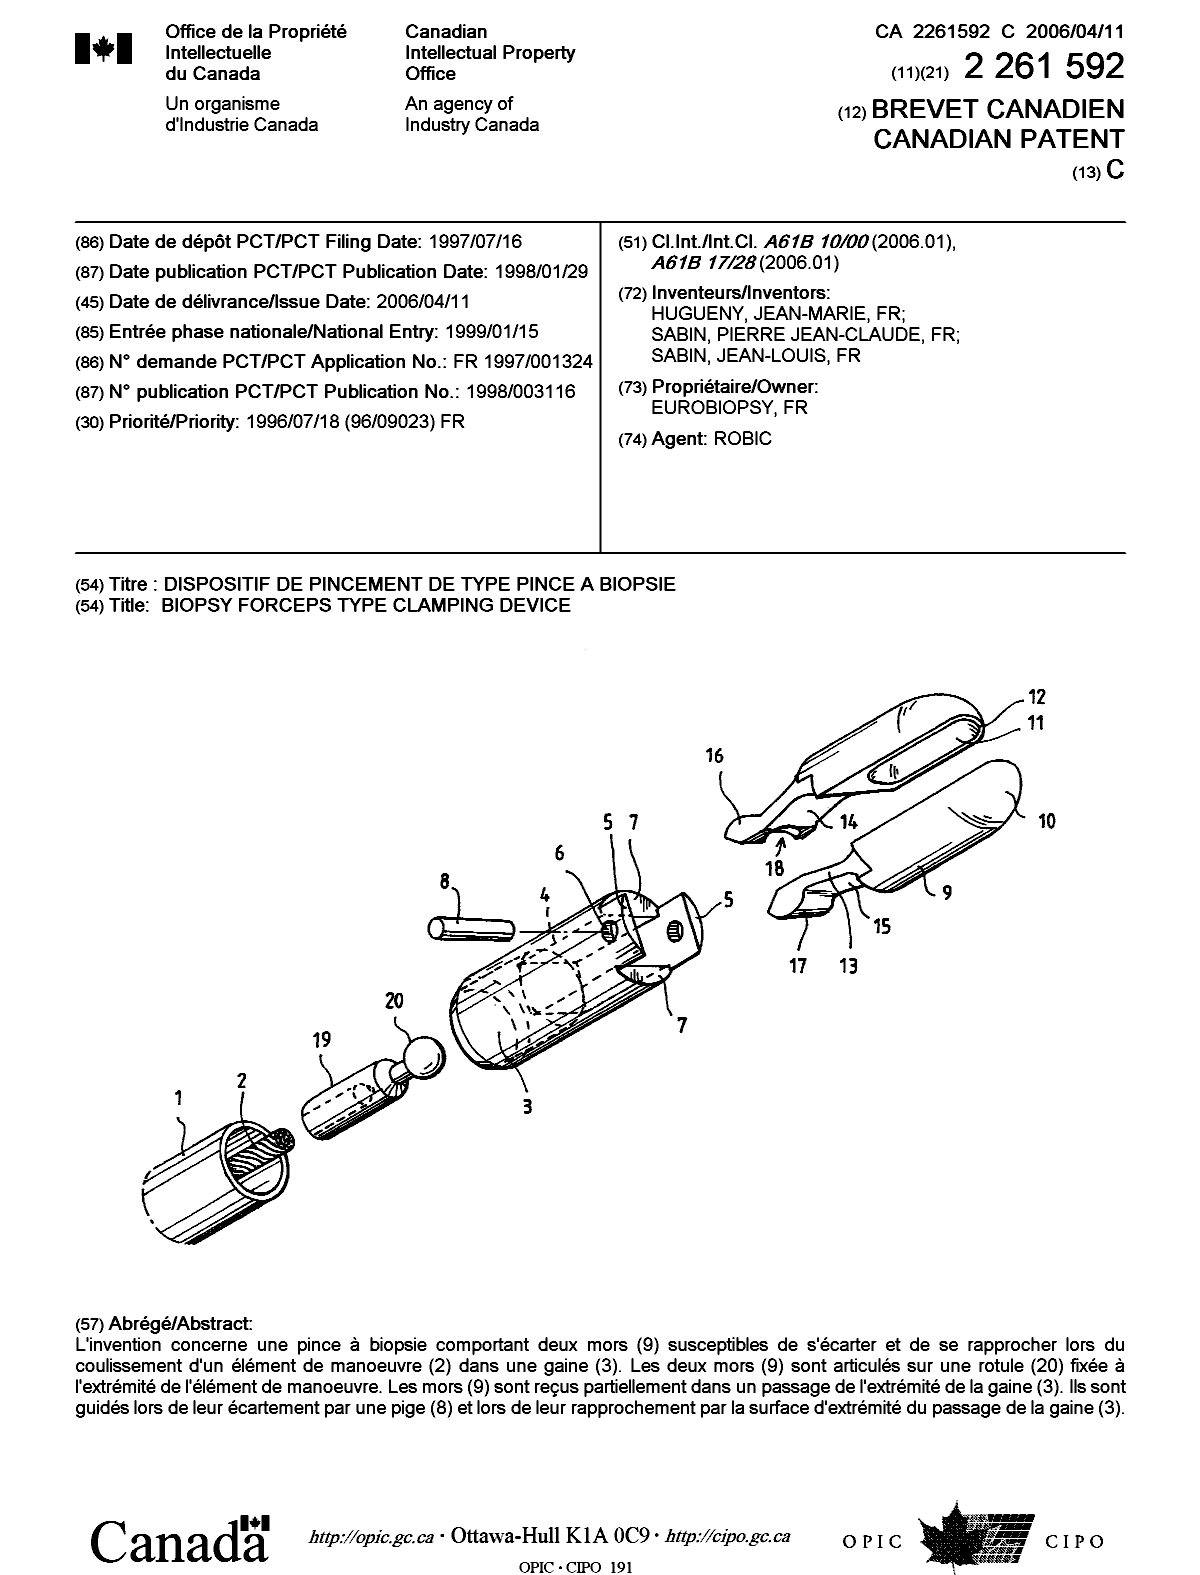 Canadian Patent Document 2261592. Cover Page 20051215. Image 1 of 1